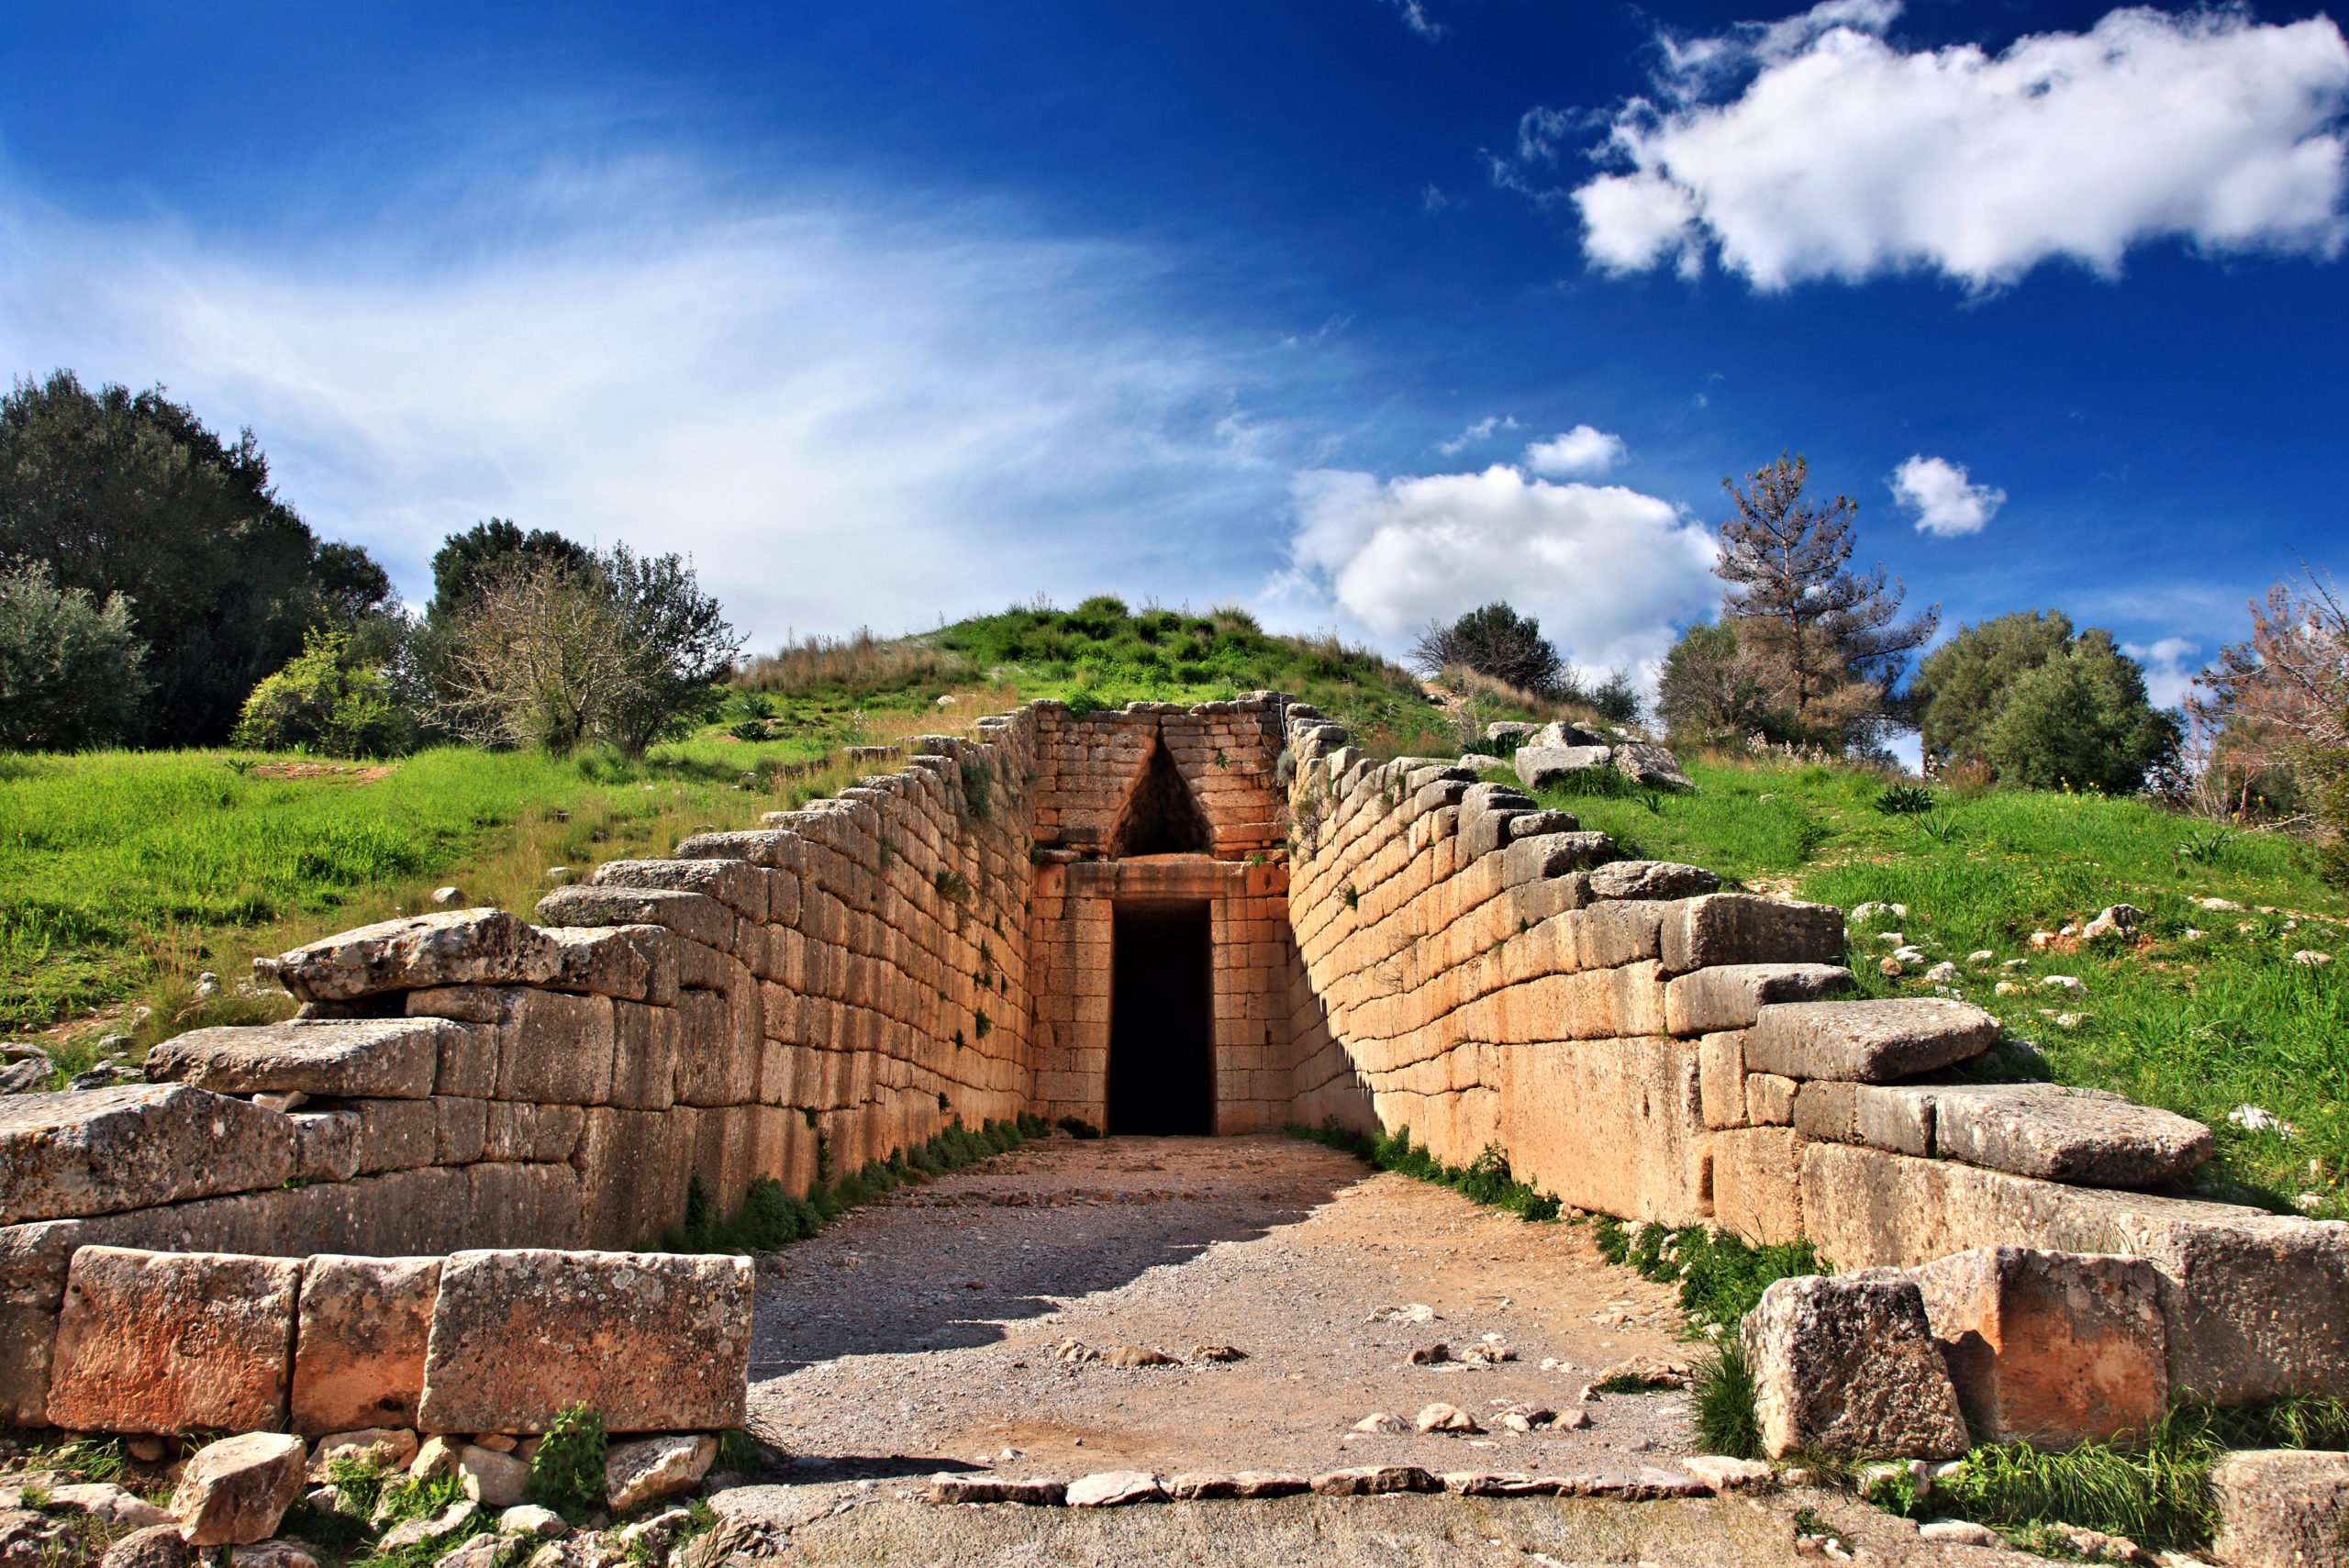 Discover The Ancient Ruins Of The Kingdom Of Agamemnon During The On The Greece 4 Day Tour Package From Athens